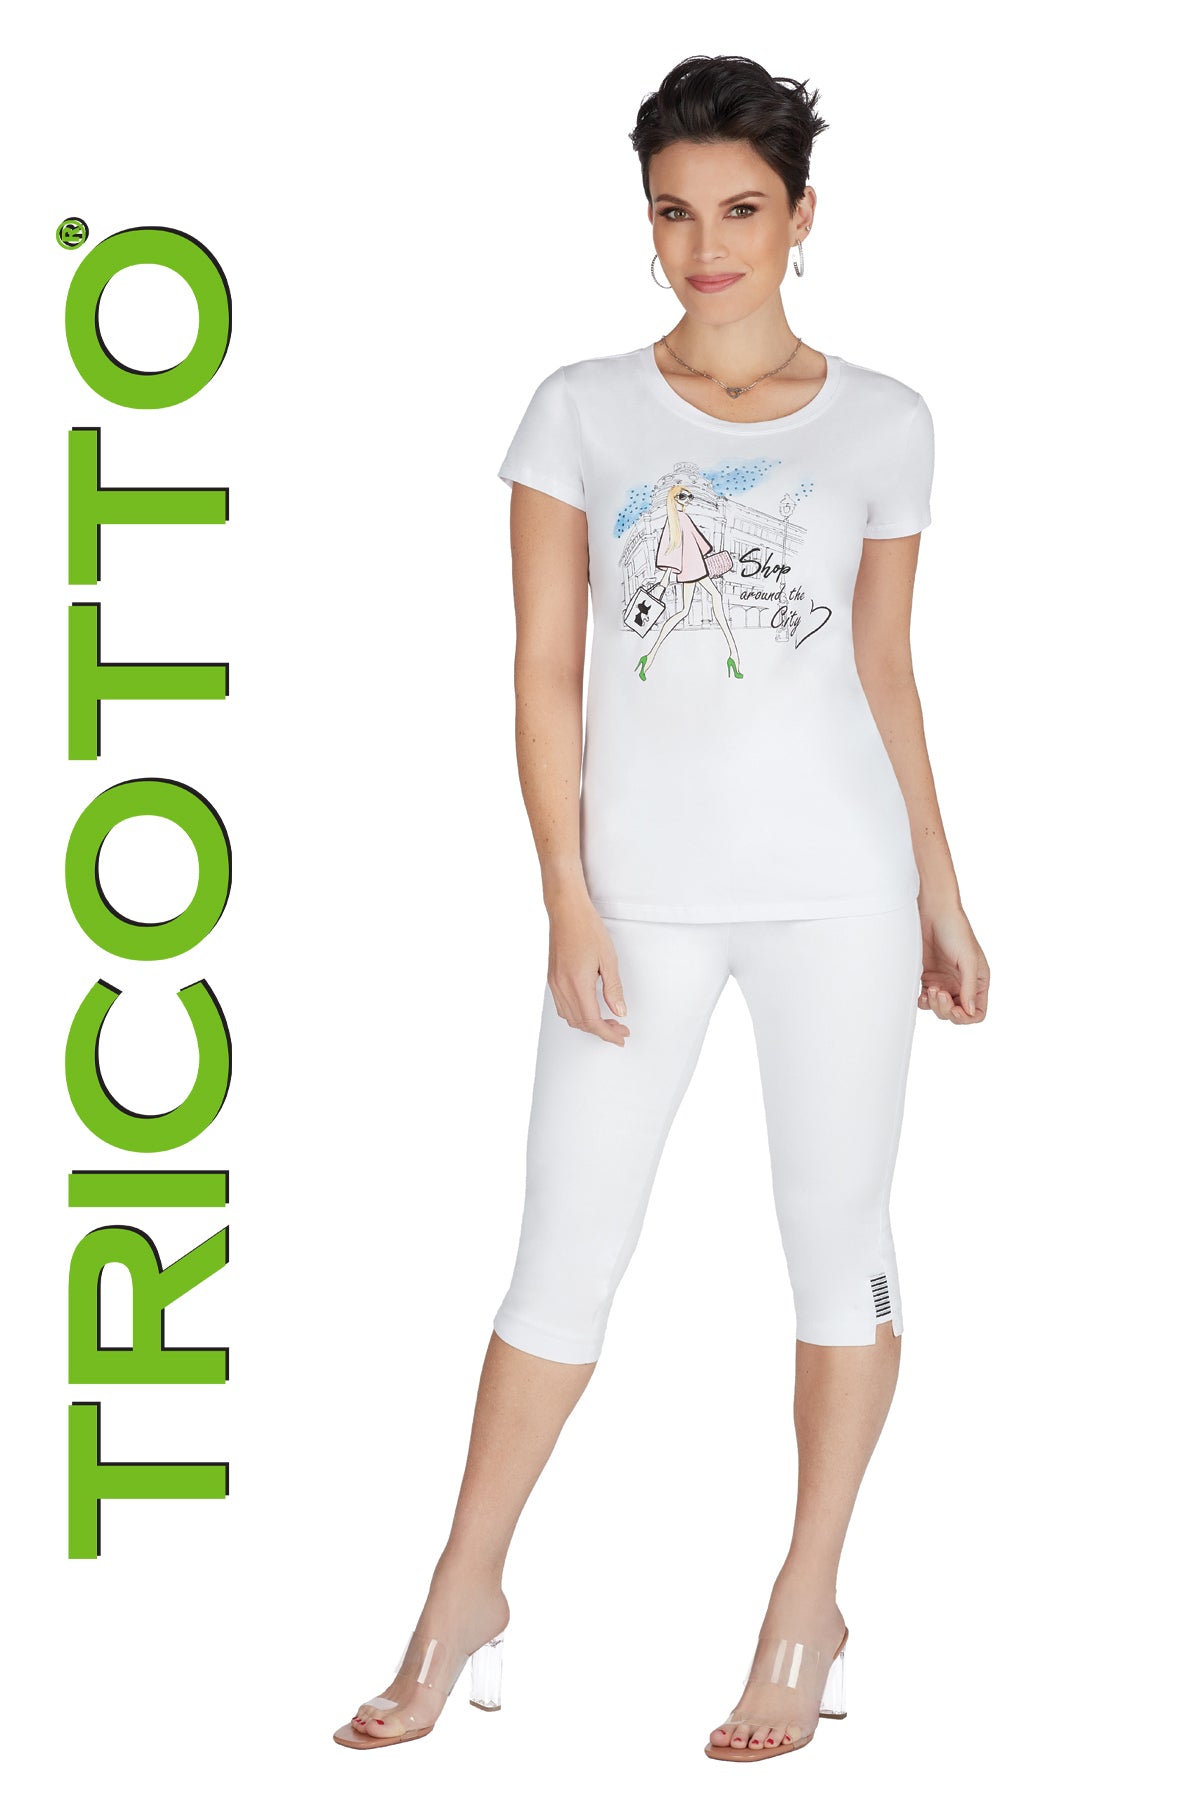 Tricotto t-shirts-Buy Tricotto T-shirts Online-Tricotto Clothing Montreal-Tricotto Clothing Quebec